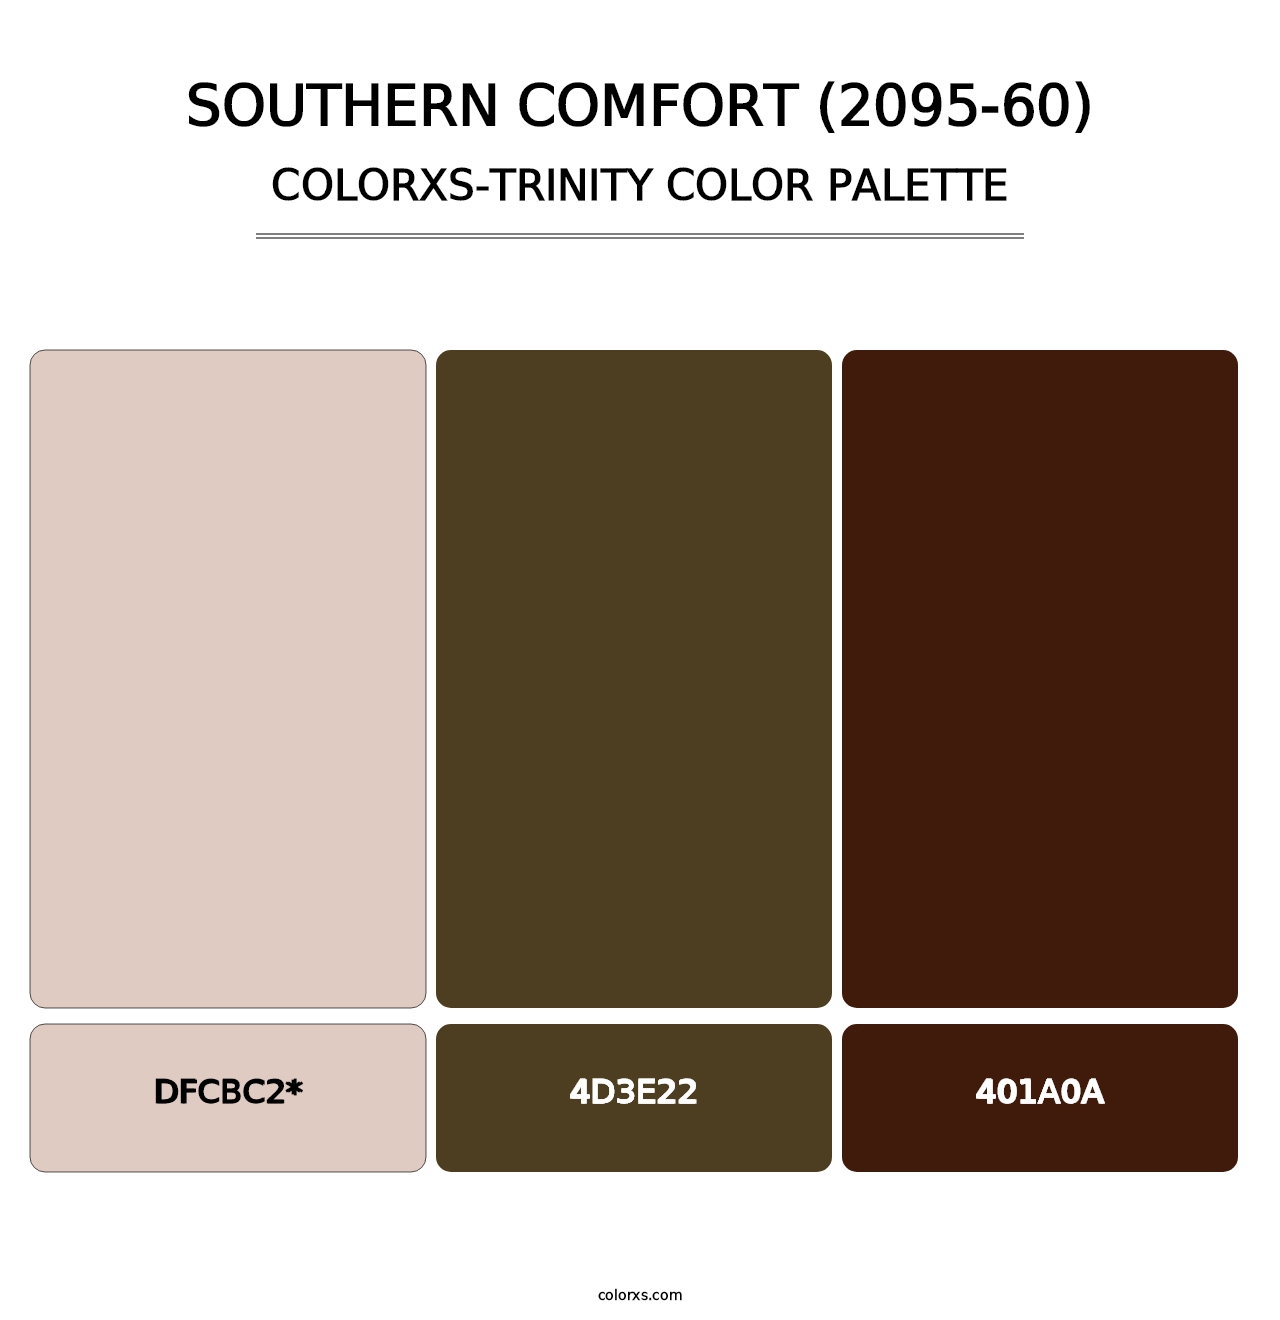 Southern Comfort (2095-60) - Colorxs Trinity Palette